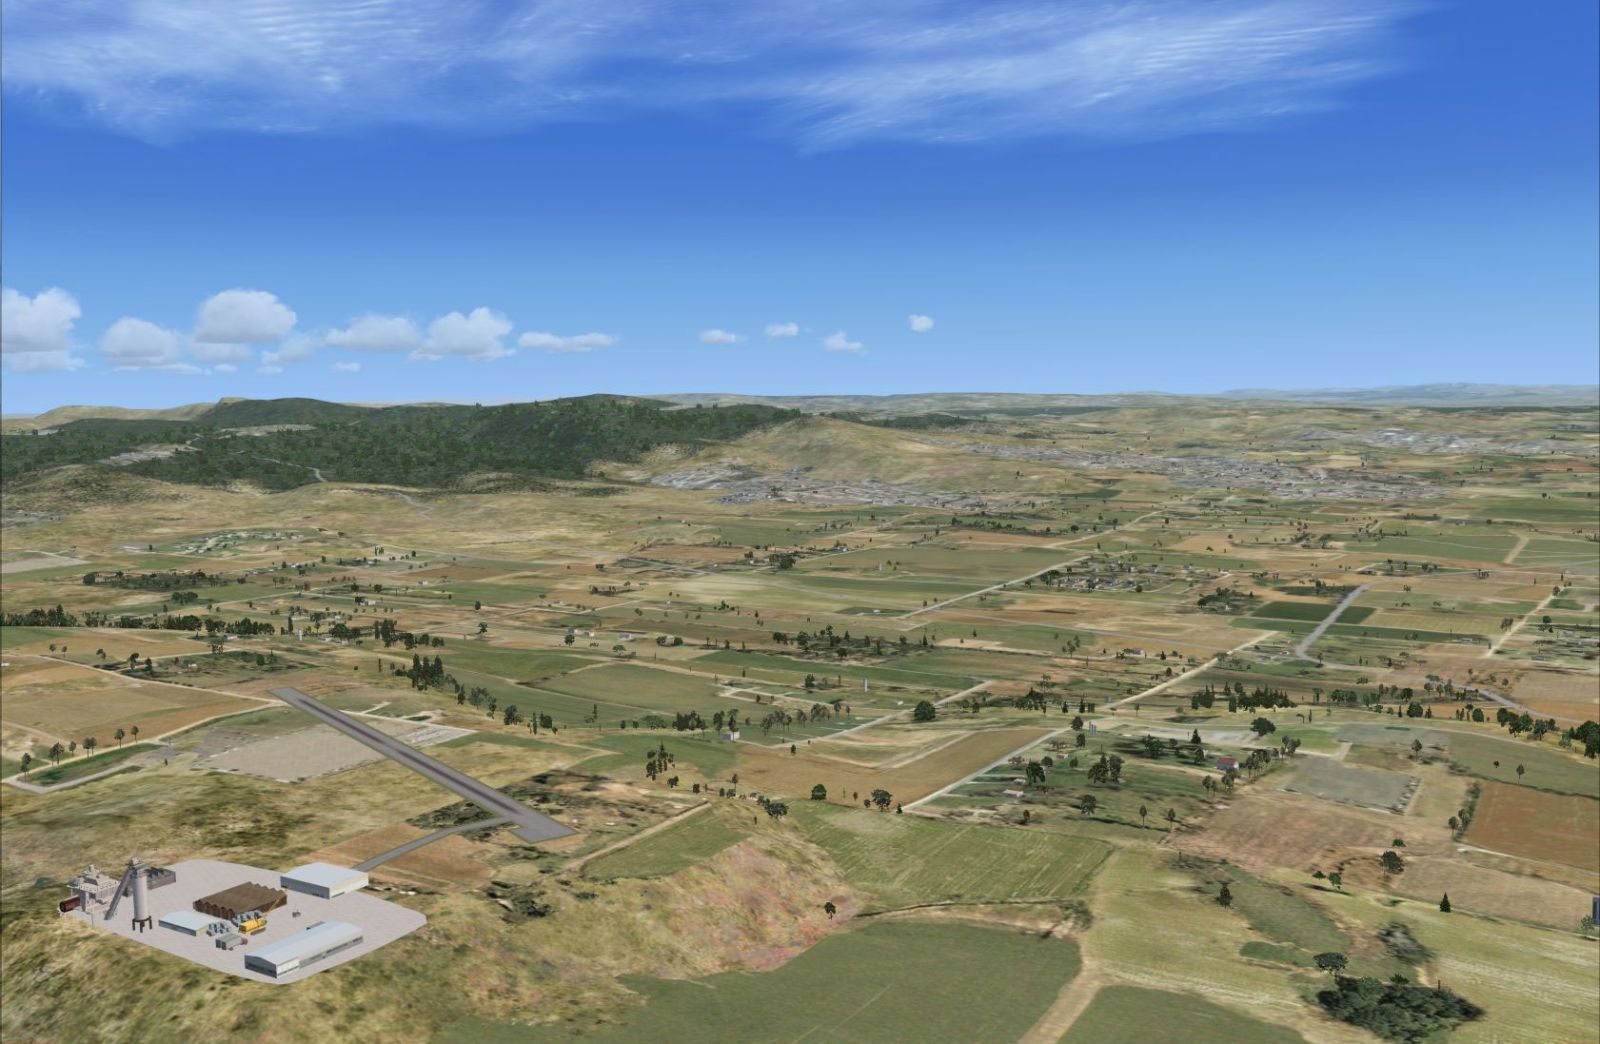 FSX Cyclone Airstrip In Israel Scenery